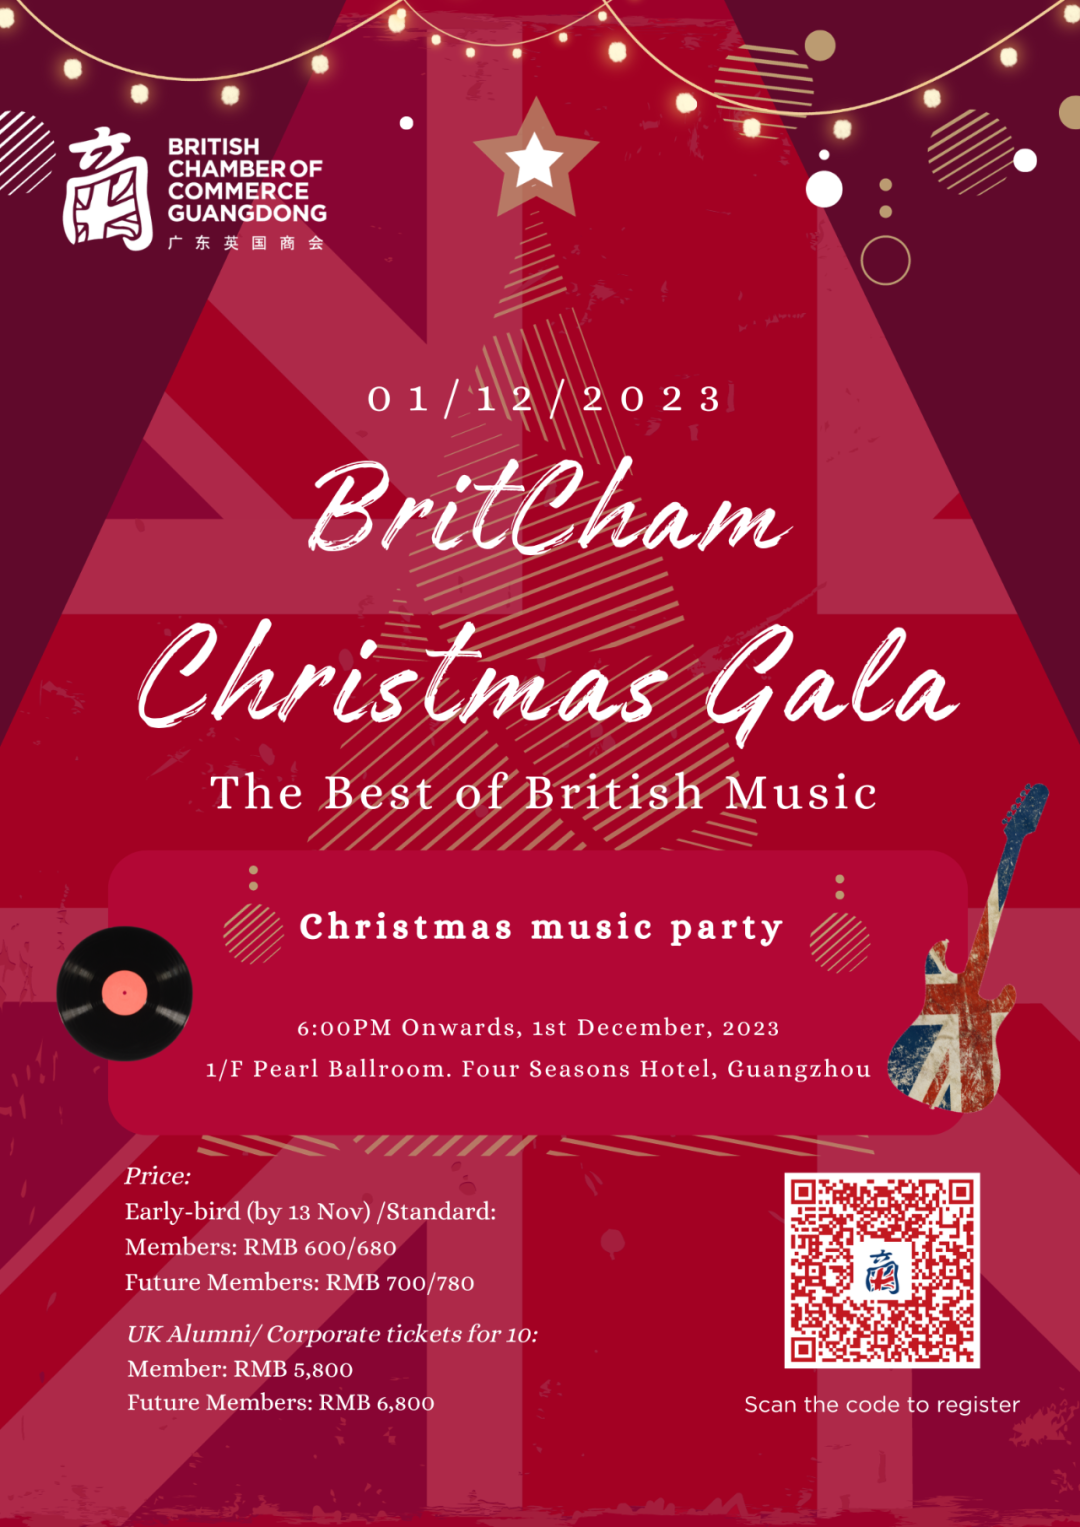 Featured image for “Christmas Gala 2023: The Best of British Music Tickets on sale!”